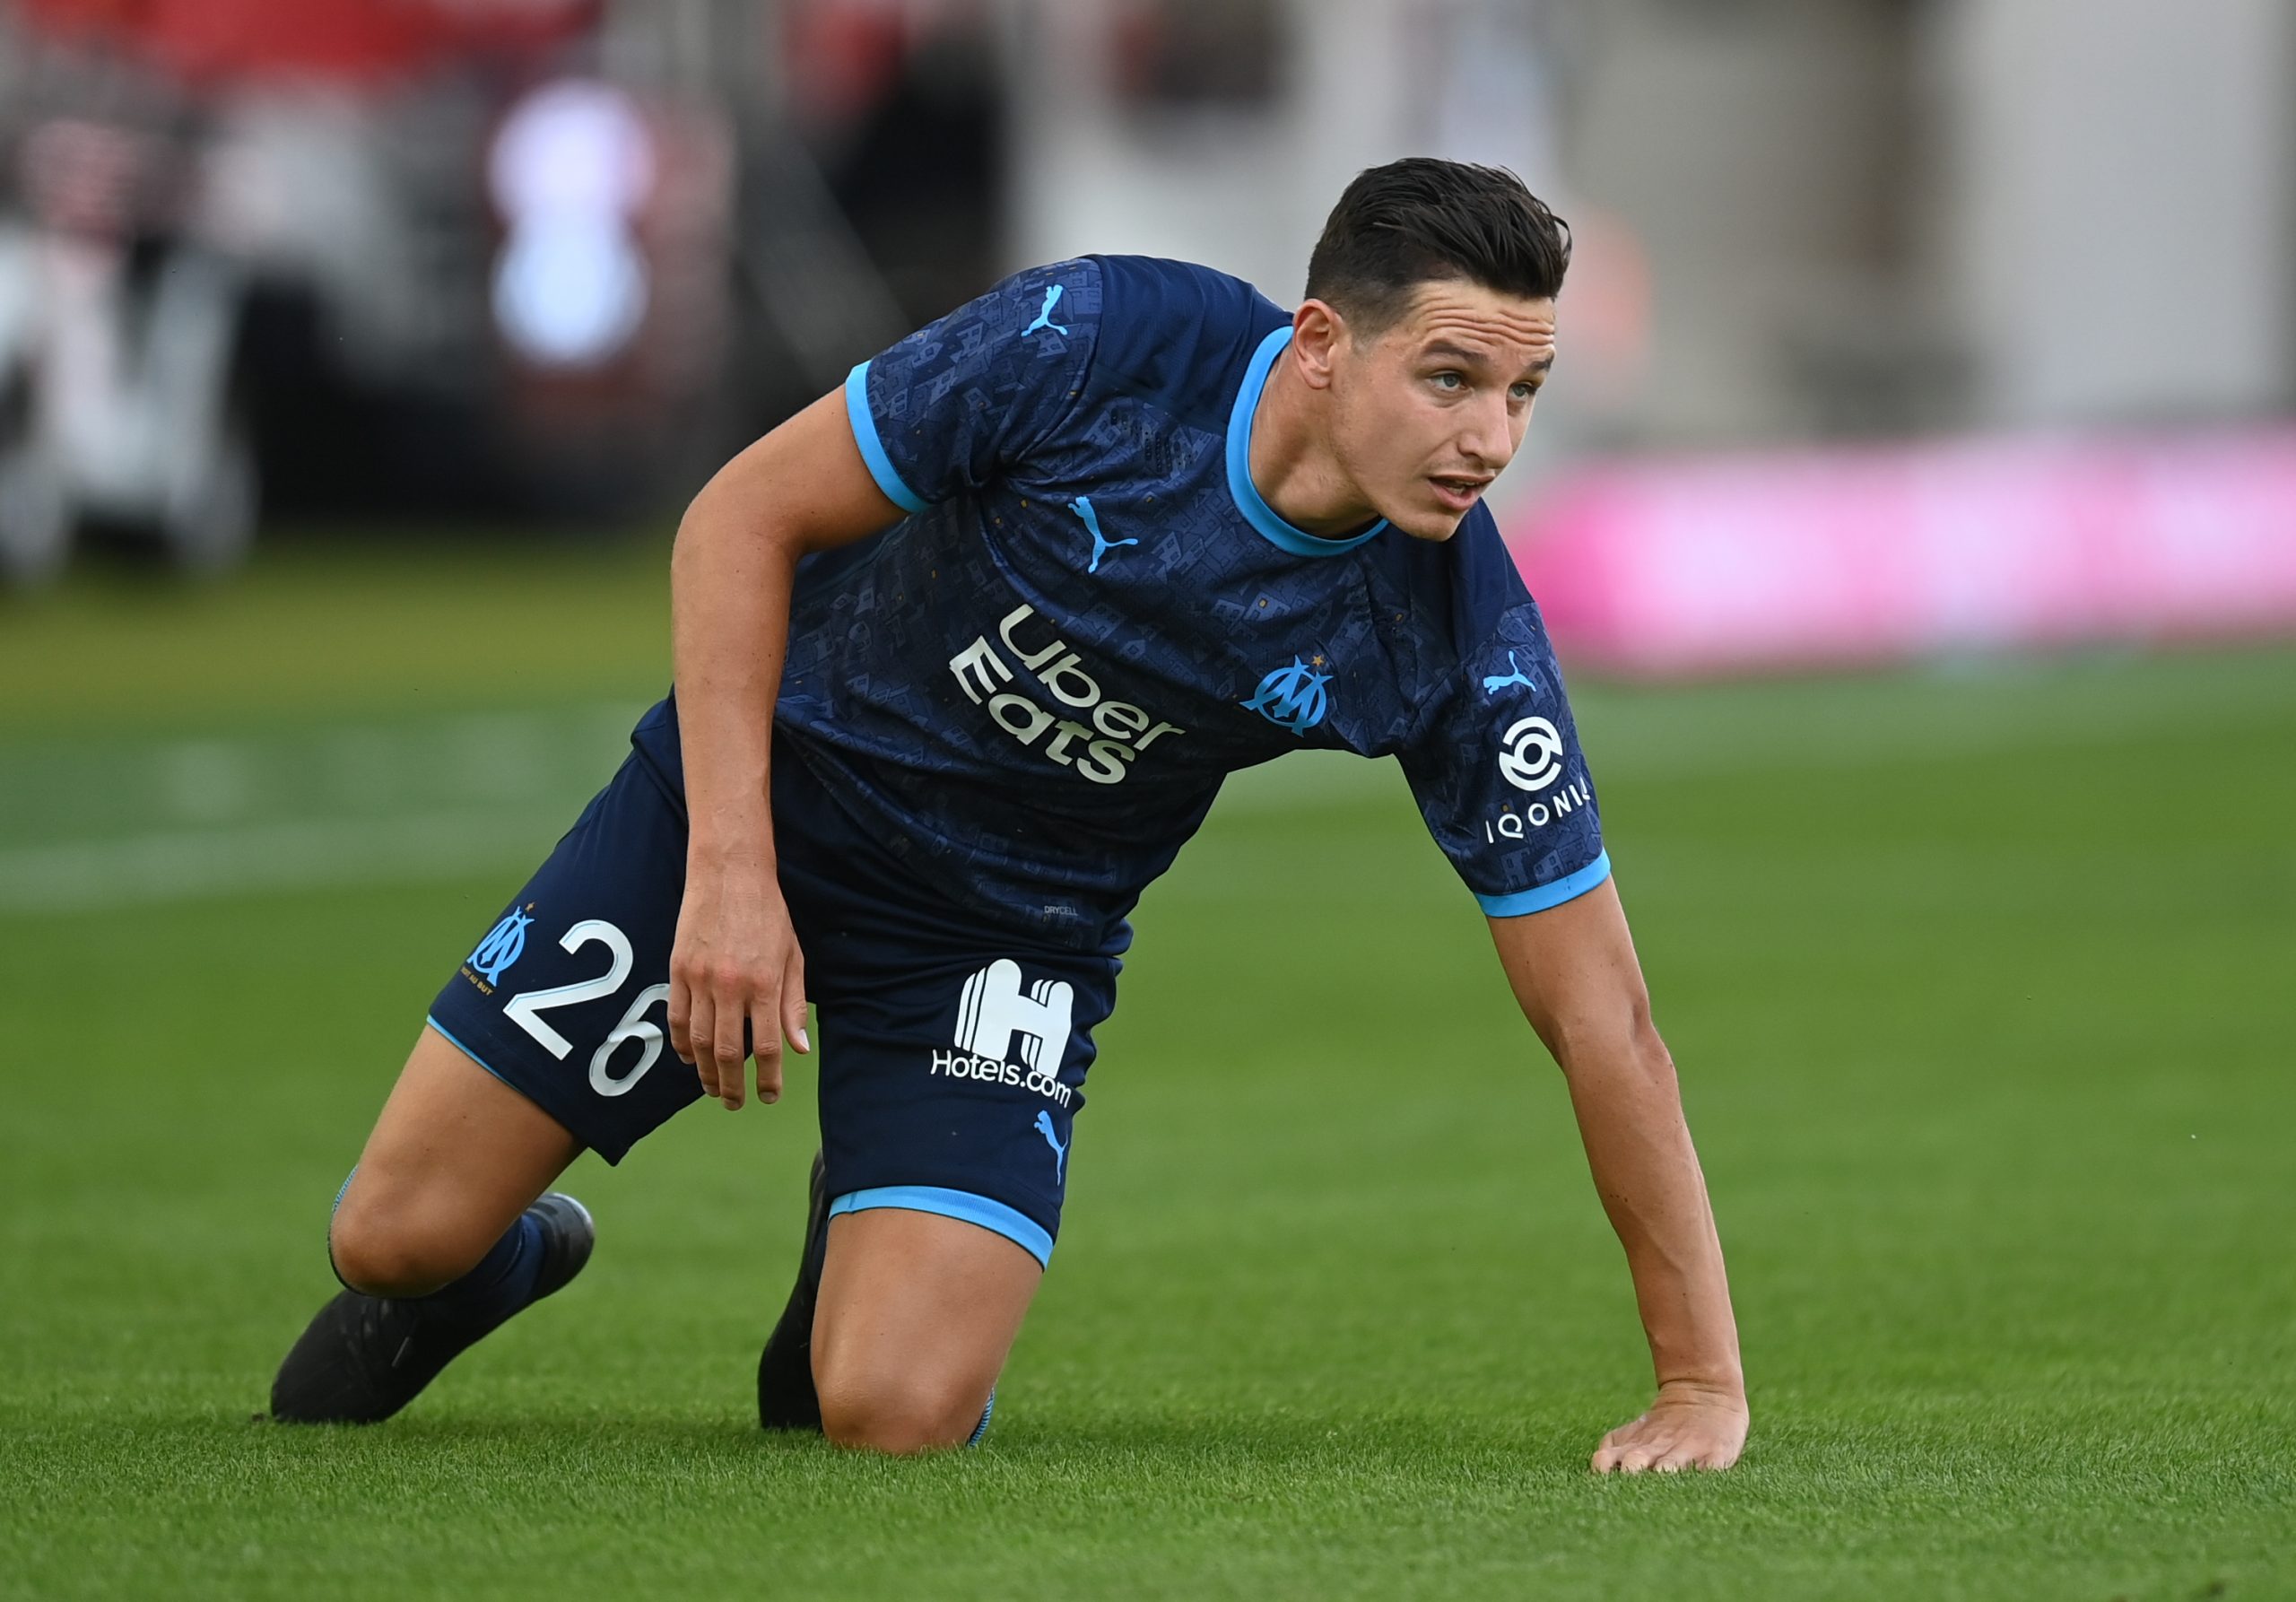 Update on Leicester City's pursuit of Florian Thauvin who is seen in the picture